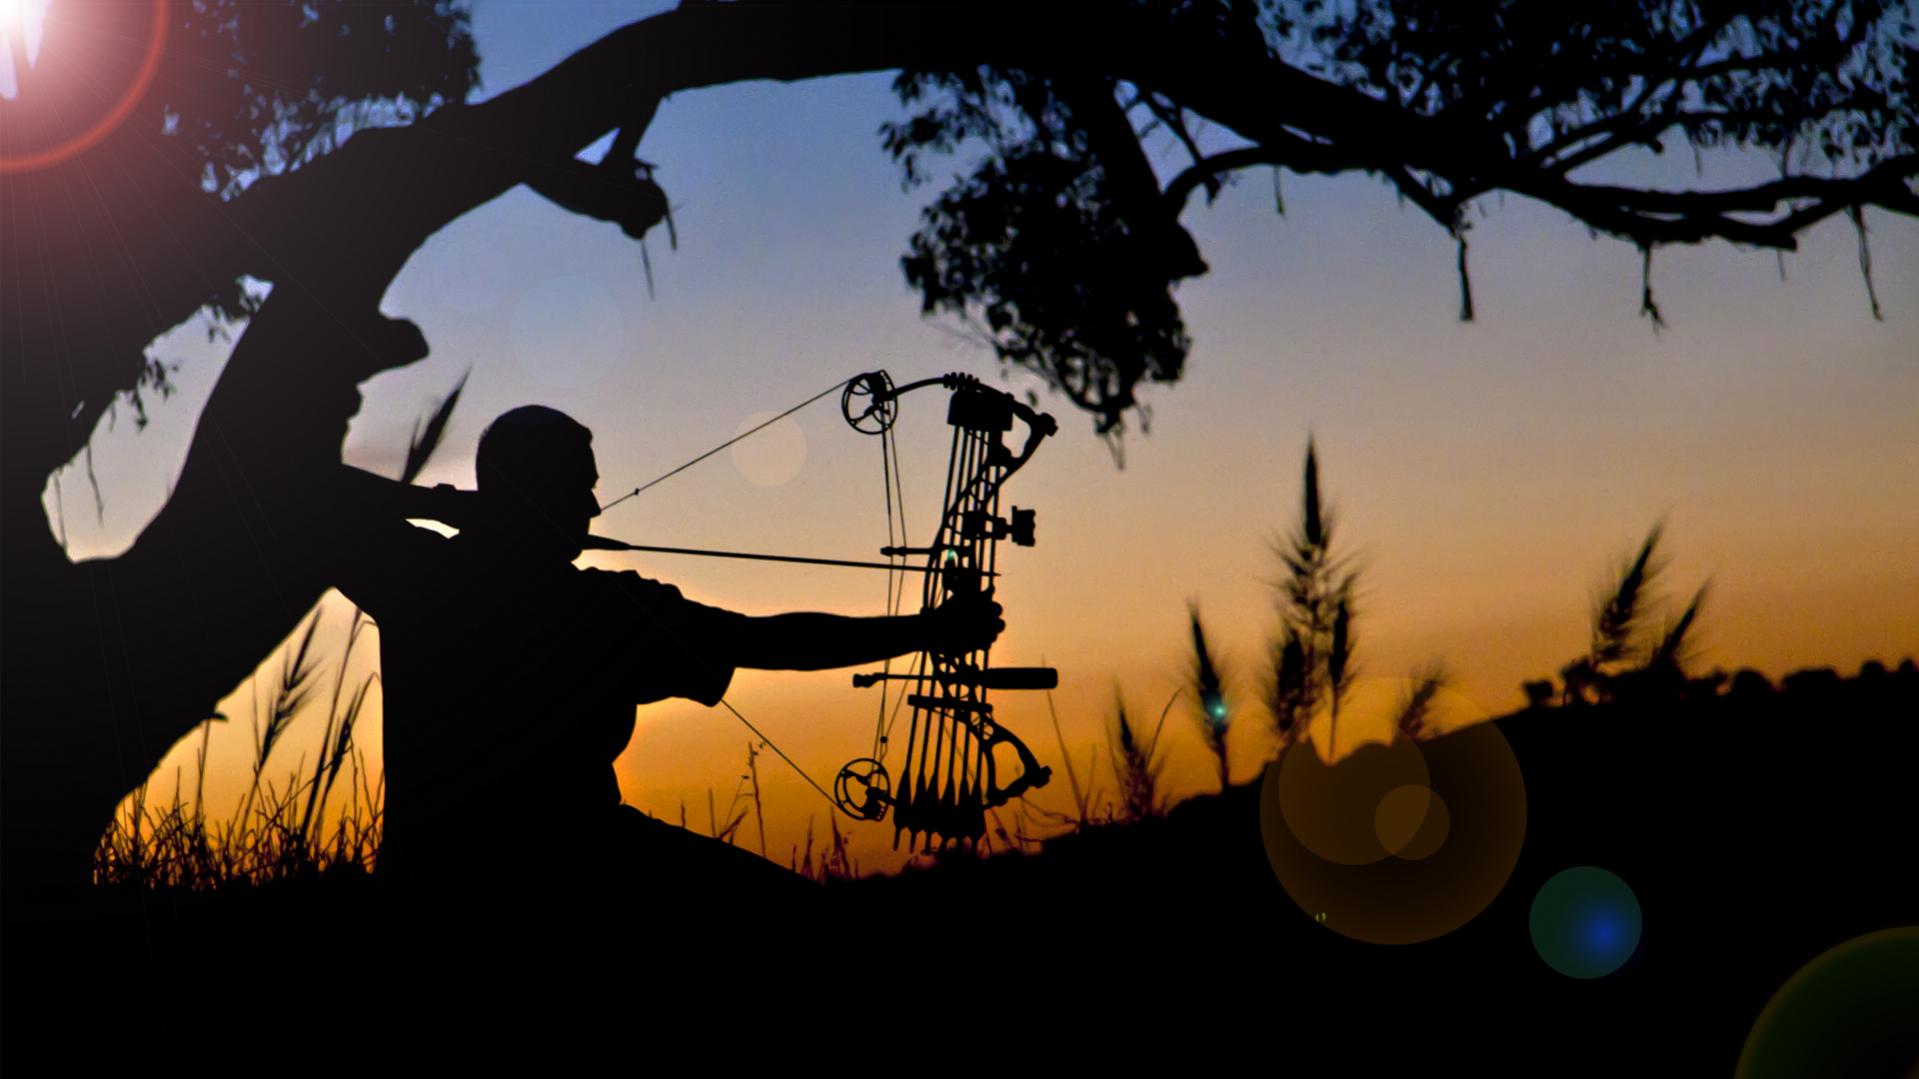 47+] Hoyt Bow Hunting Wallpapers